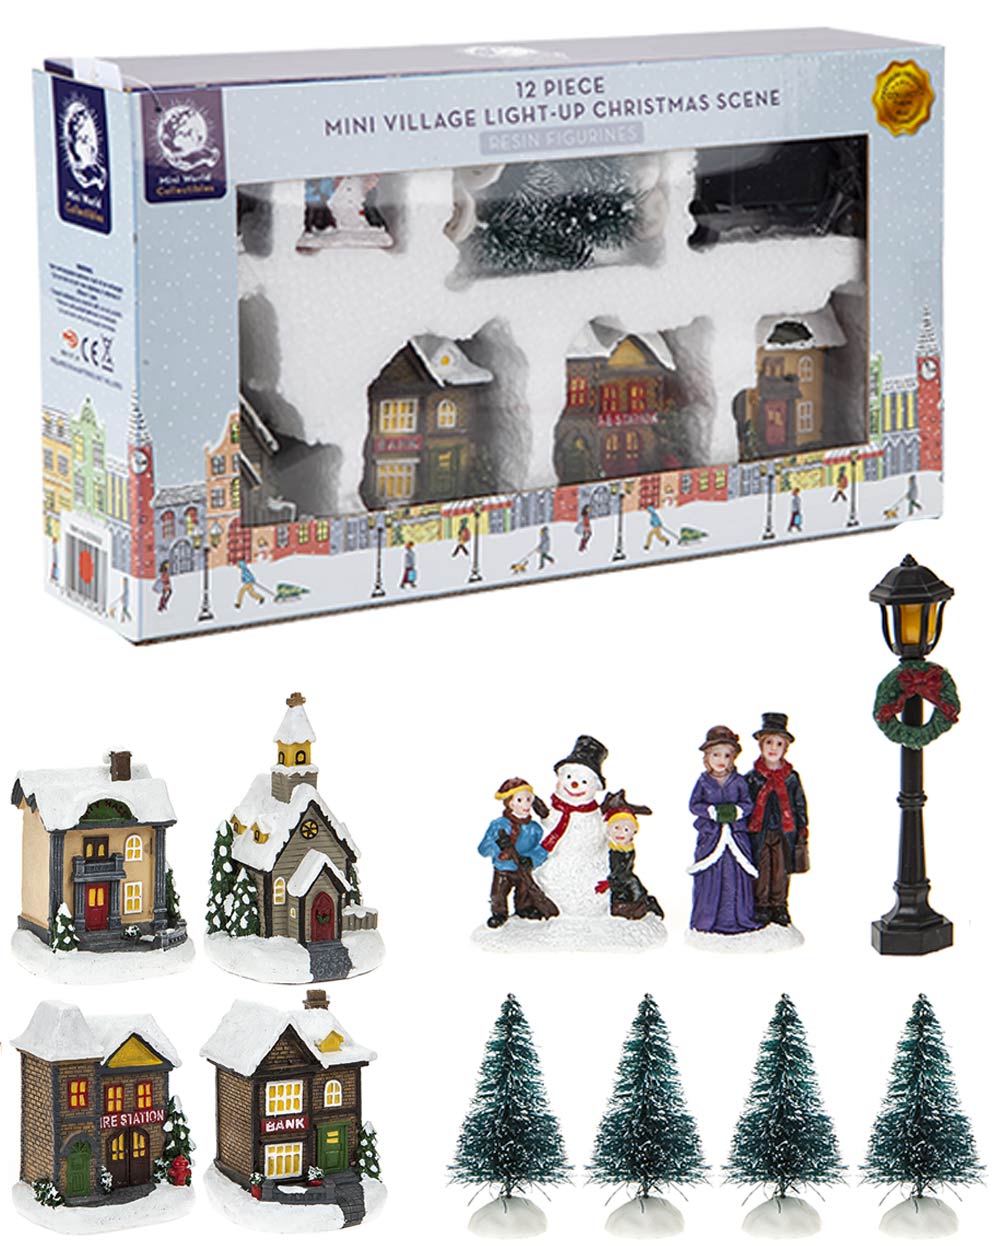 mini village light up Christmas scene boxed and unboxed